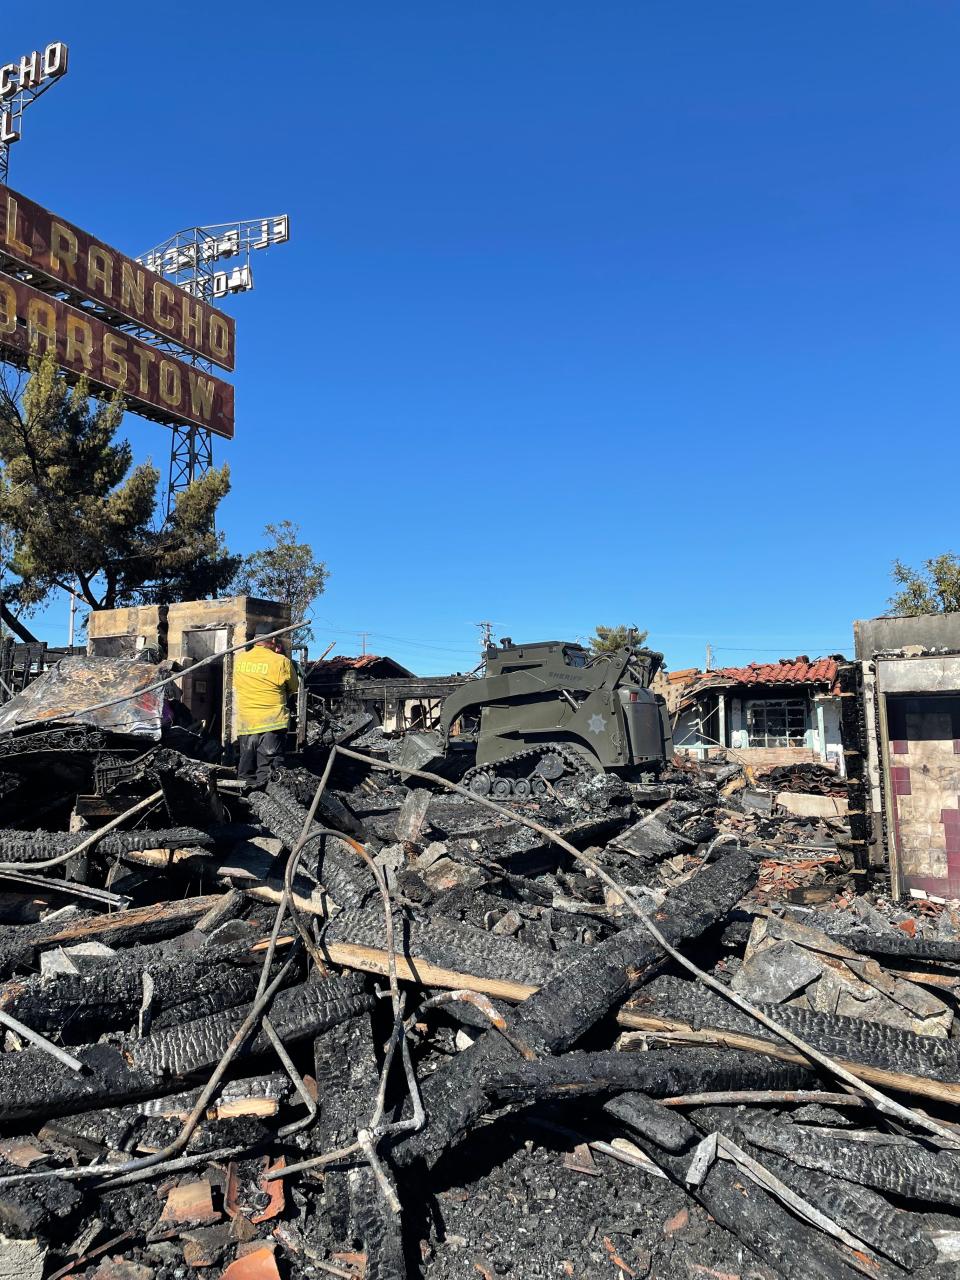 An inferno engulfed most of structure that makes up the more than 70-year-old El Rancho Motel on Main Street in Barstow on July 5, 2022, dousing its iconic “El Rancho Barstow” sign with smoke.